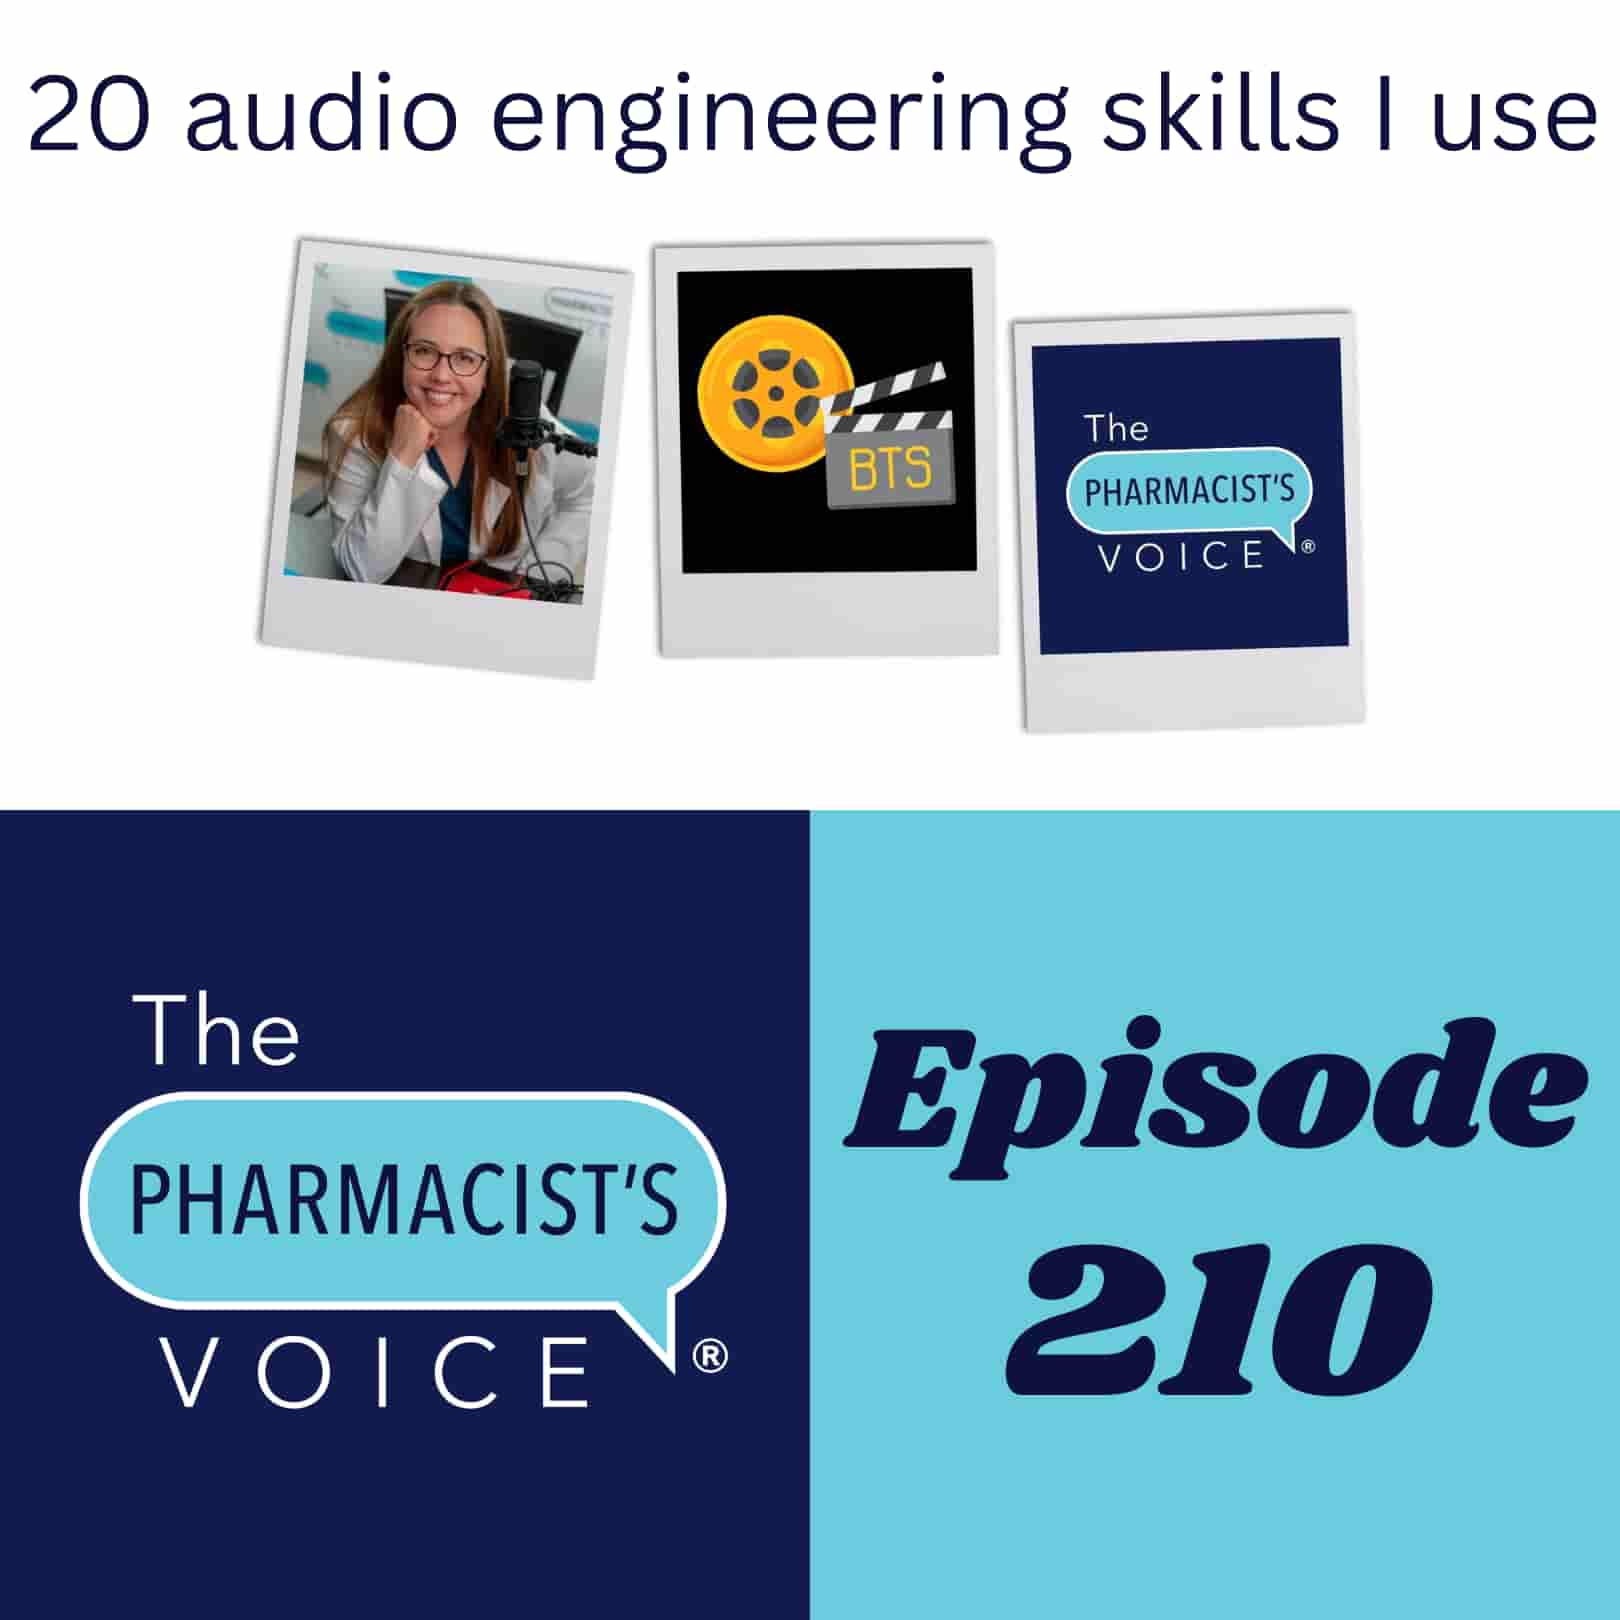 audio engineering skills are the topic of this podcast episode. This is artwork for episode 210 of The Pharmacist's Voice Podcast. You can find it at https://www.thepharmacistsvoice.com.